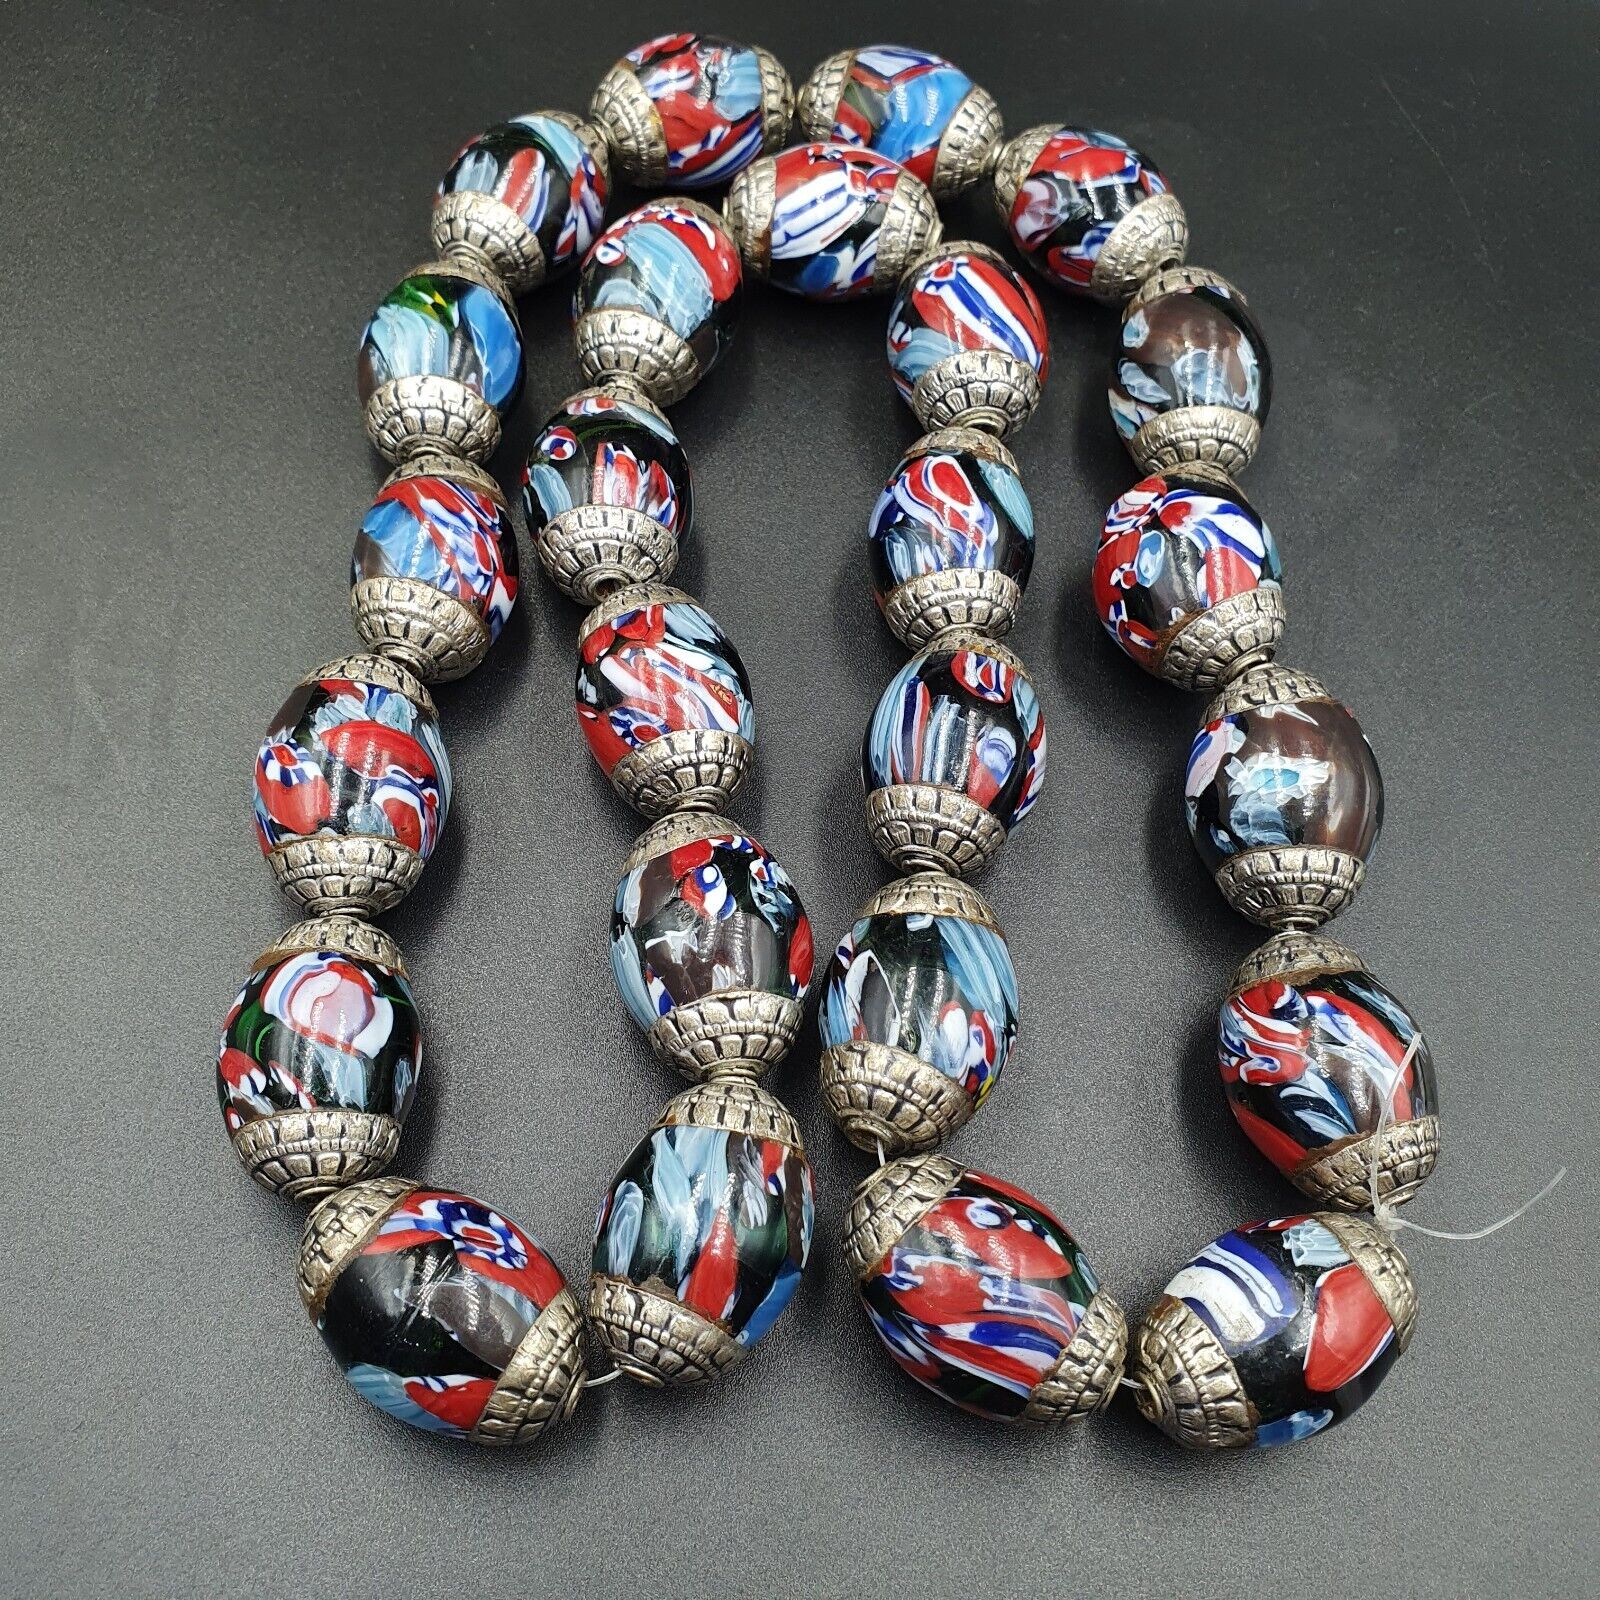 Beautiful Old Tibetan Silver Nepalese Glass Beads Jewelry Necklace